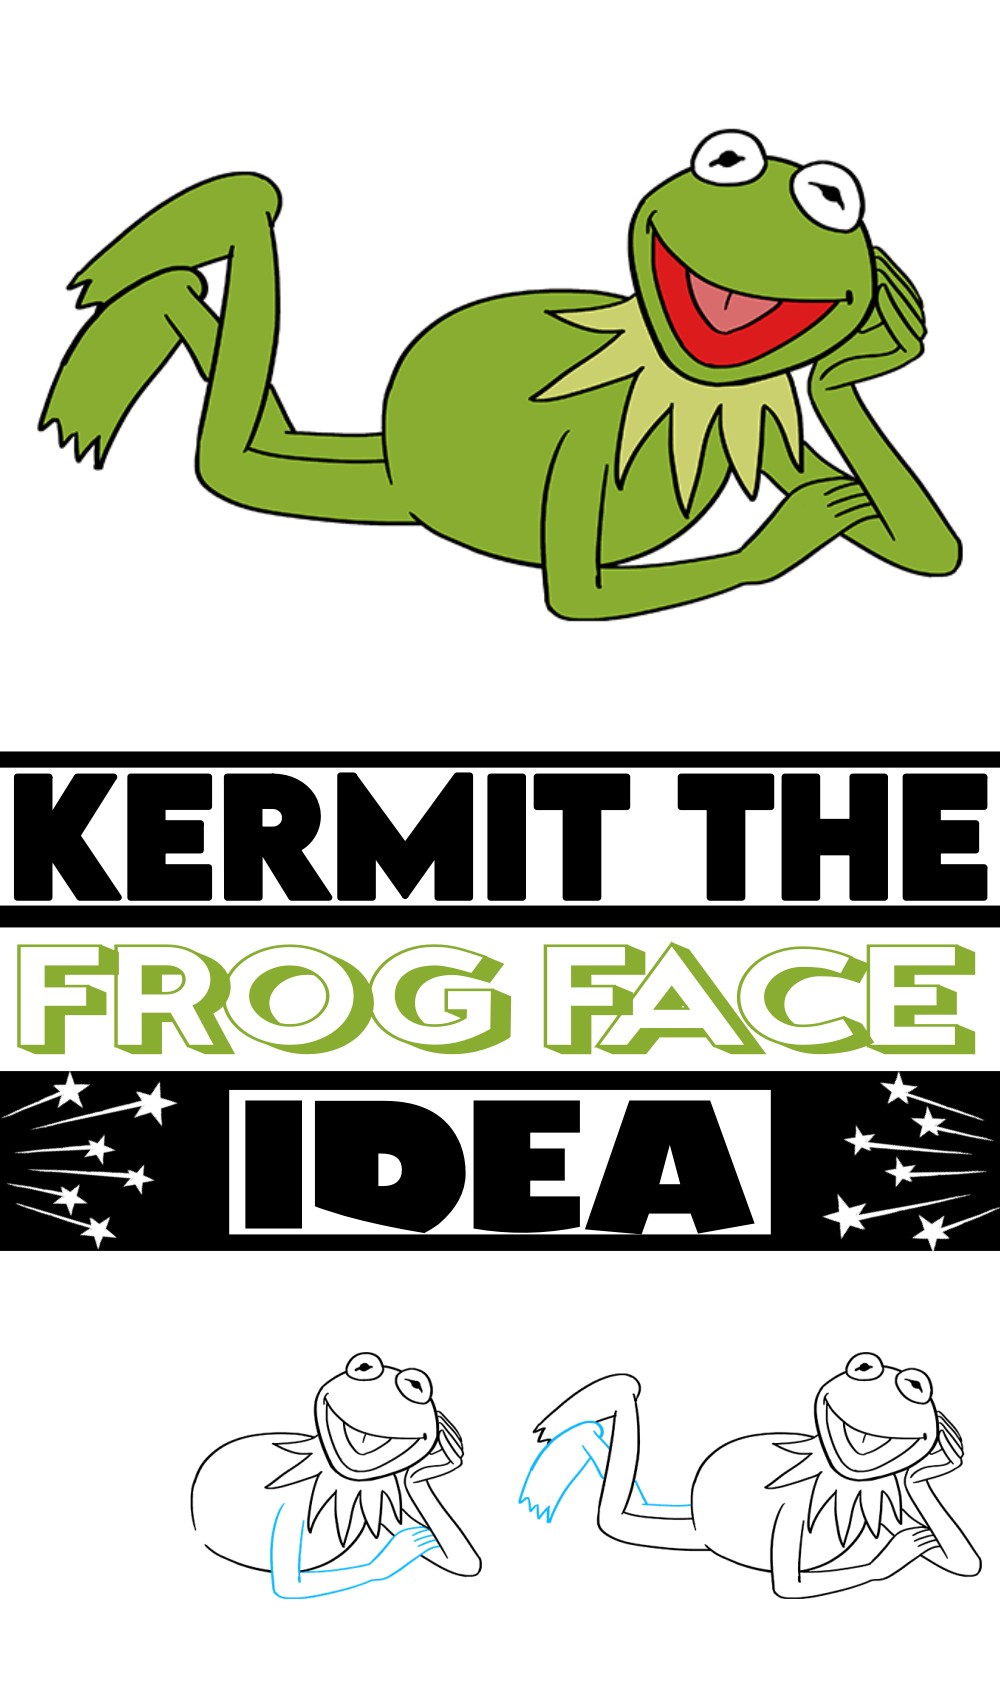 Kermit The Frog Face